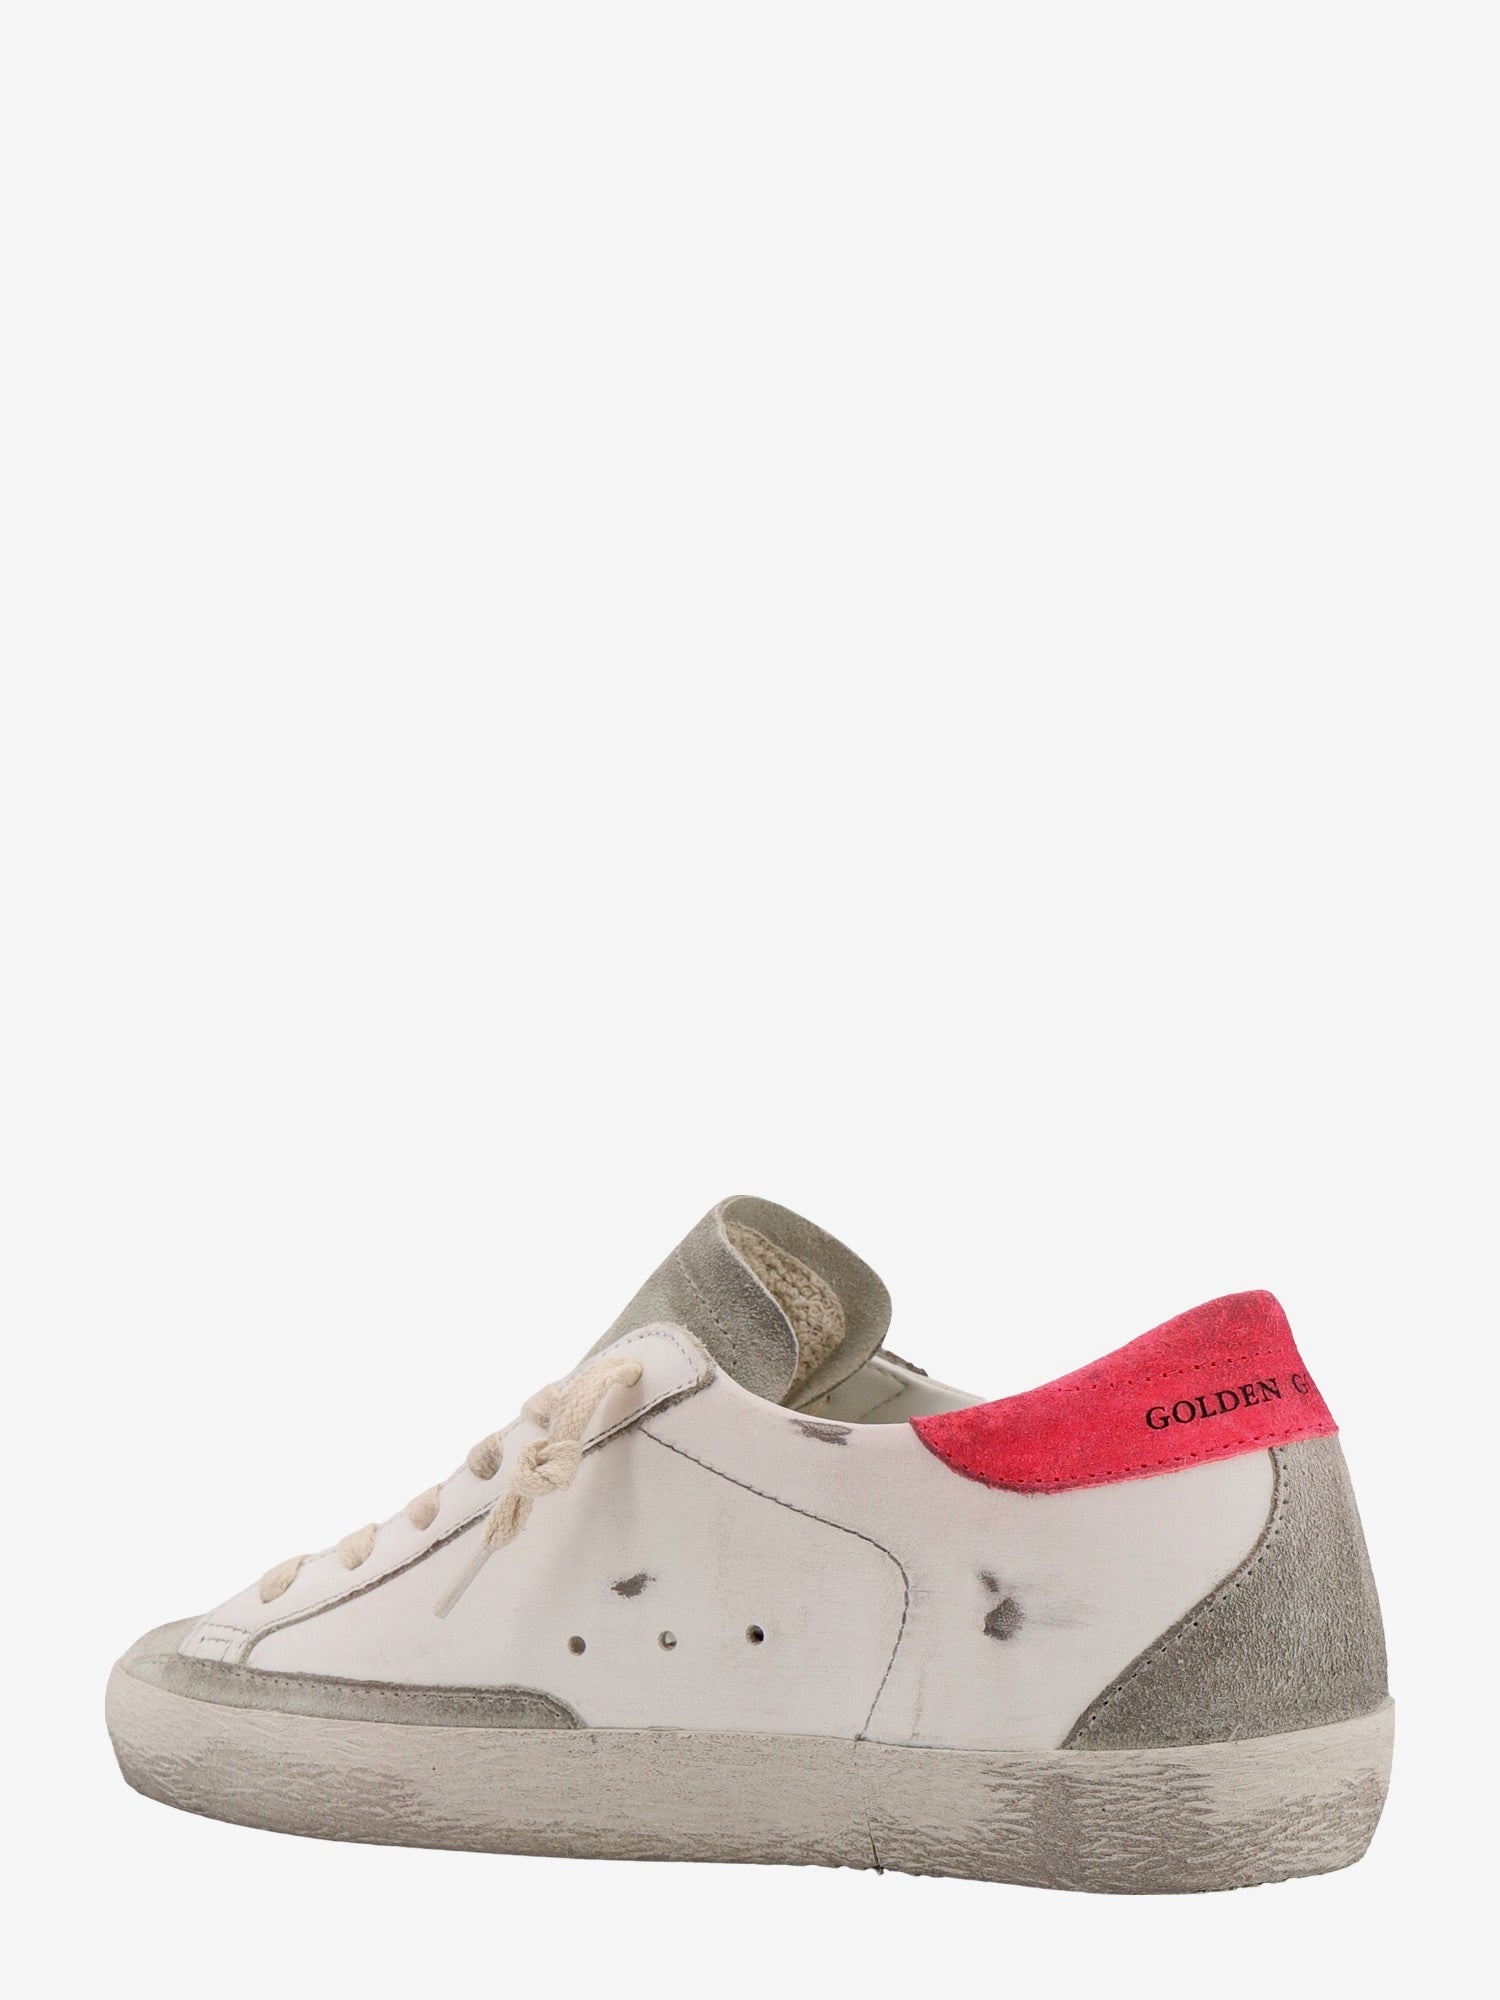 Golden Goose Deluxe Brand Woman Super-Star Woman White Sneakers - 3